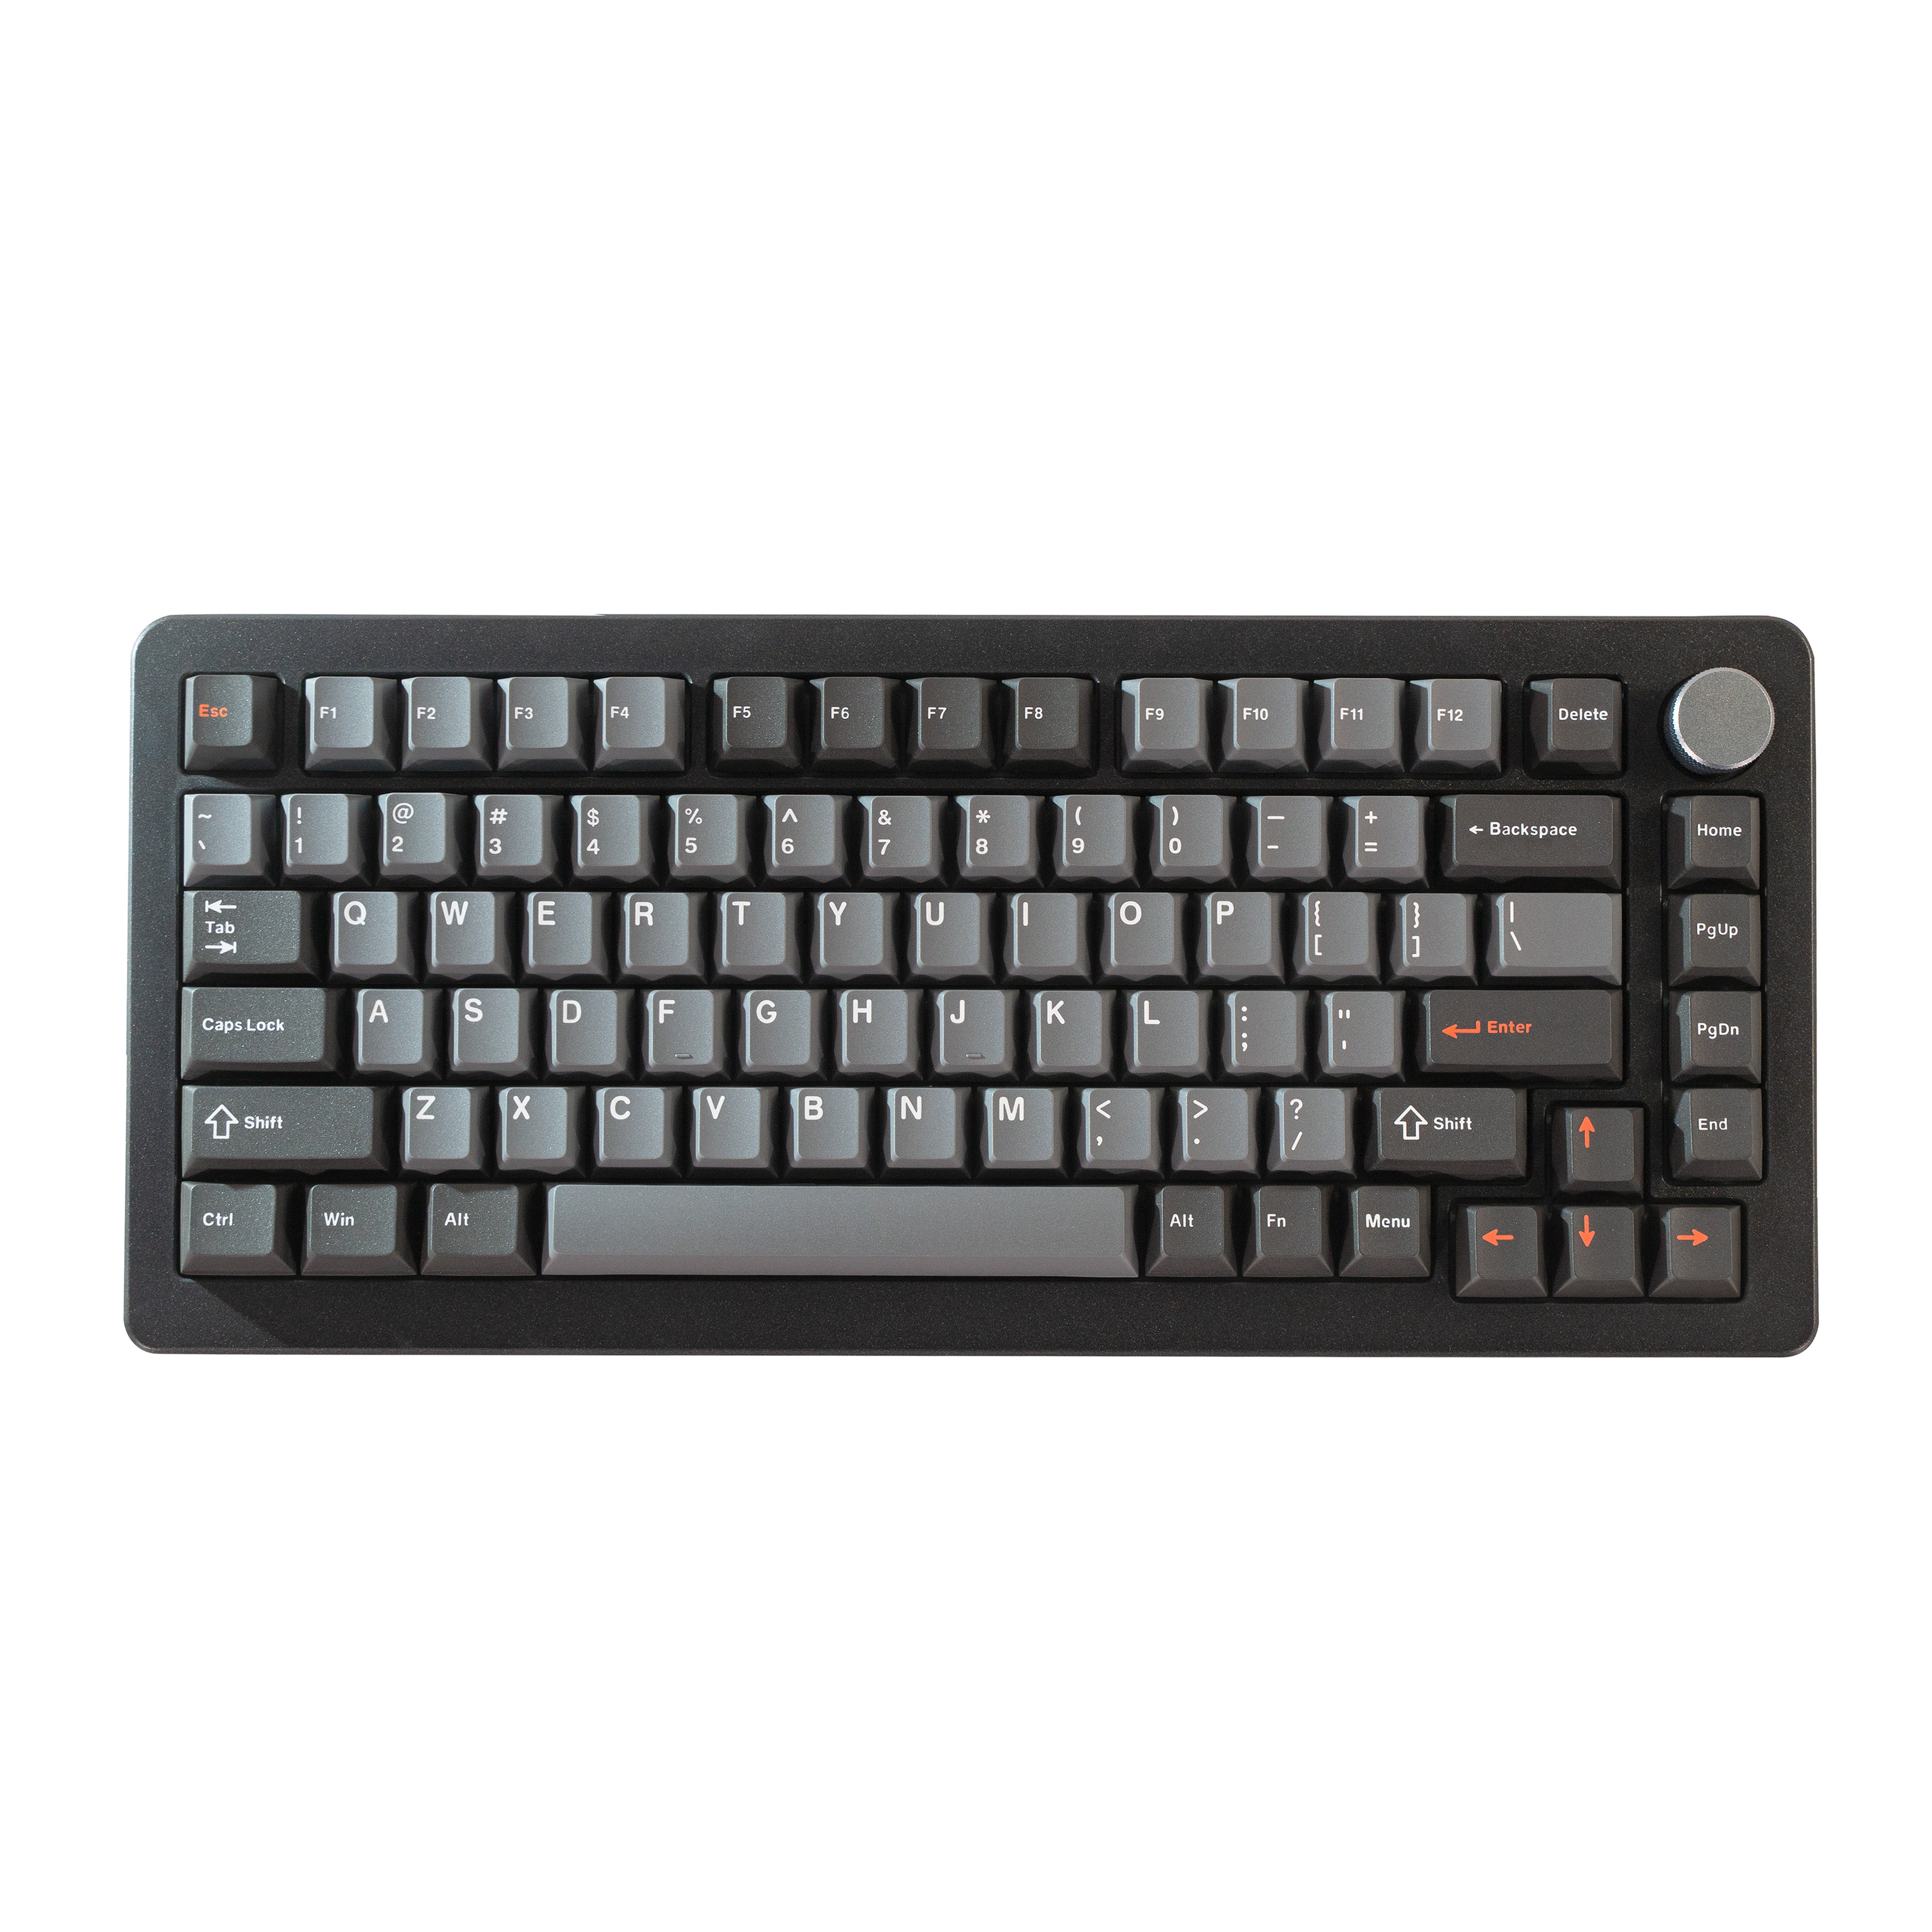 DrunkDeer A75 Pro - Rapid Trigger Keyboard Magnetic Switch